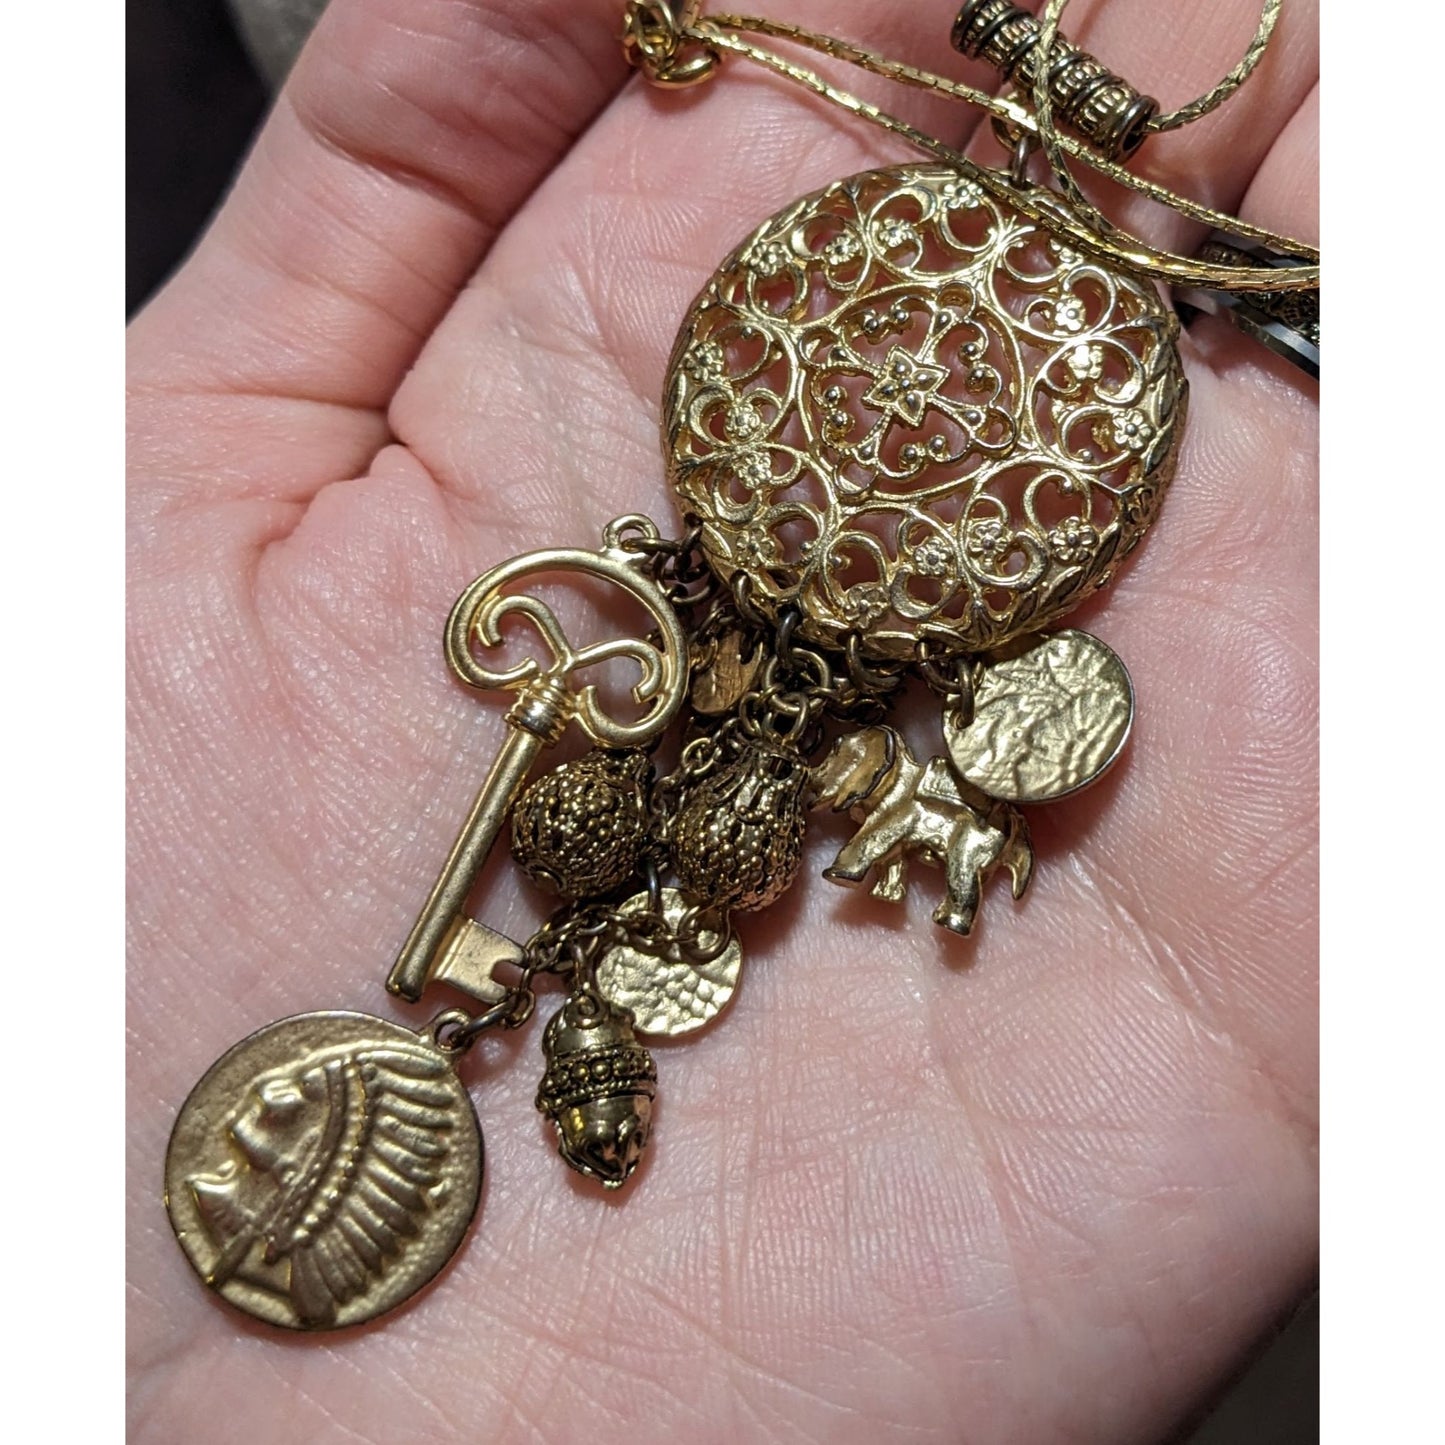 Vintage Gold Chatelaine Style Charm Necklace